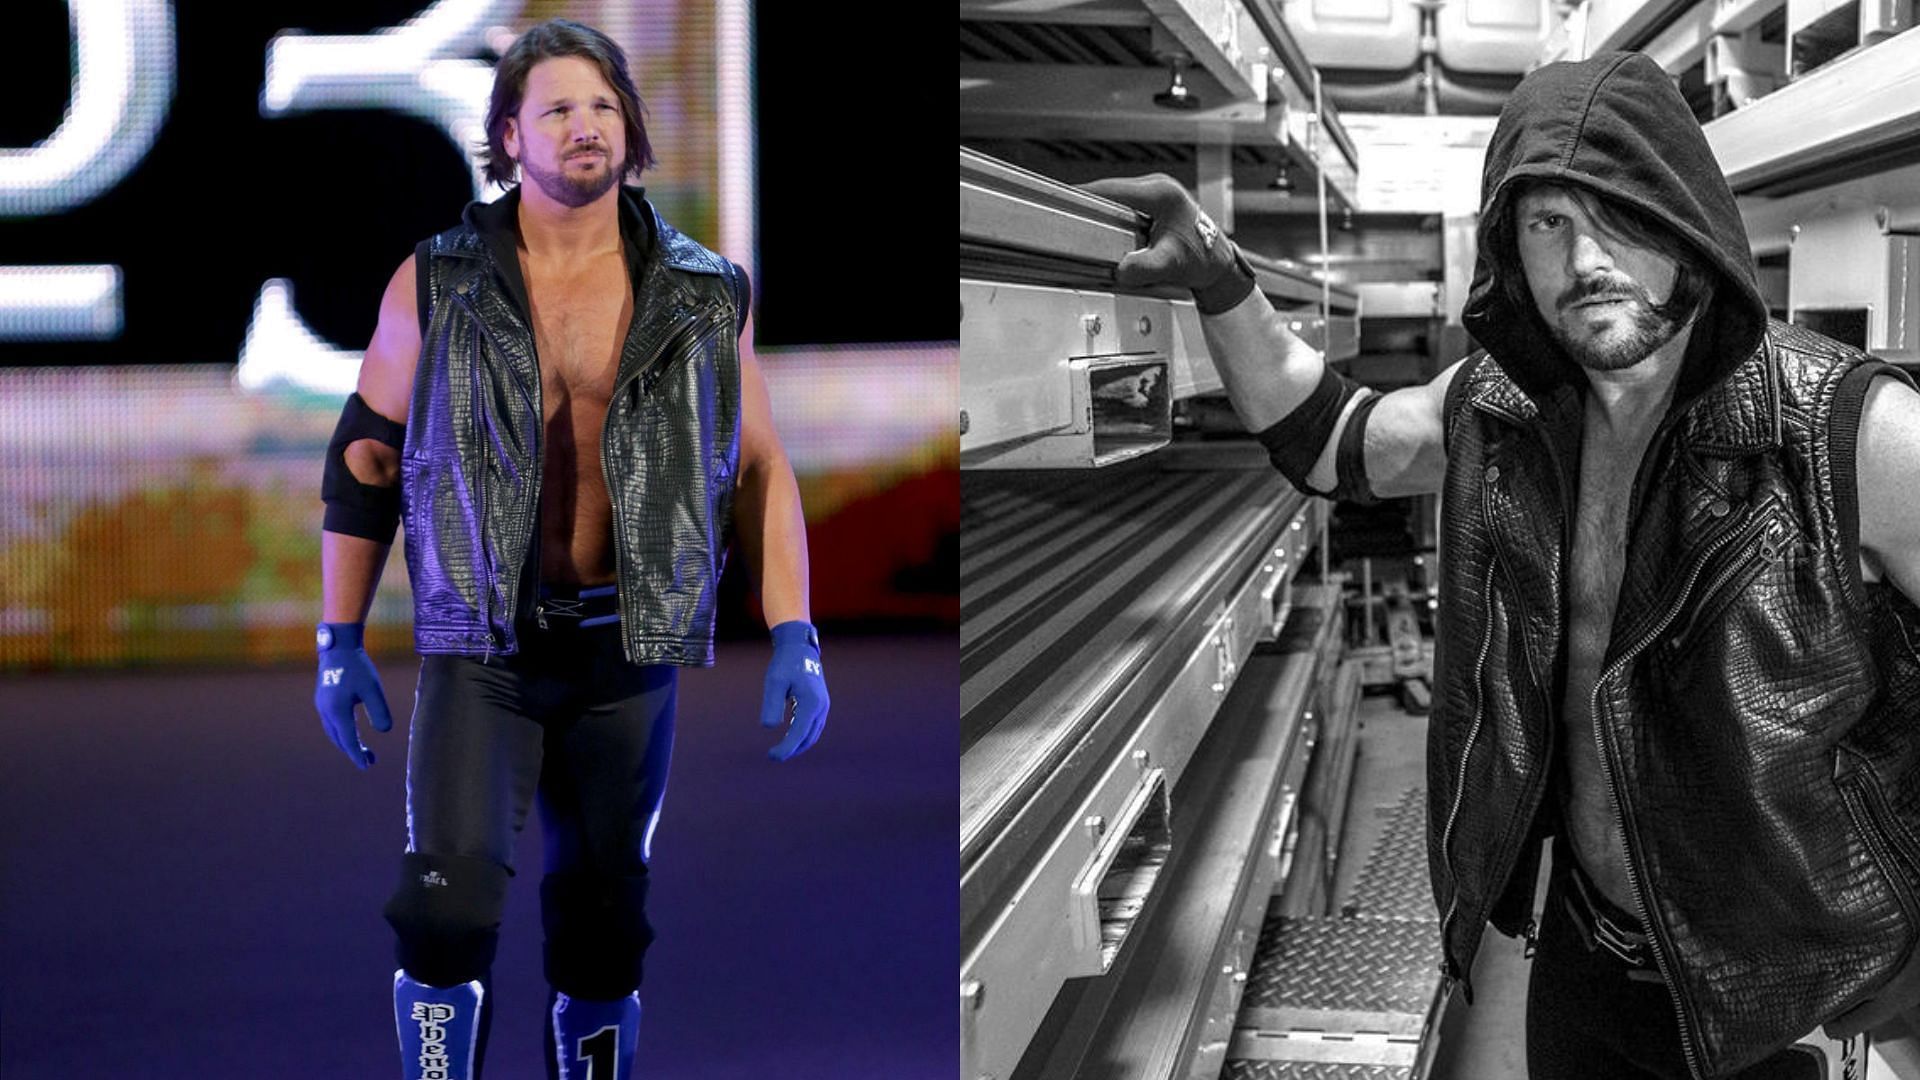 The Phenomenal AJ Styles set foot in WWE 8 years ago.